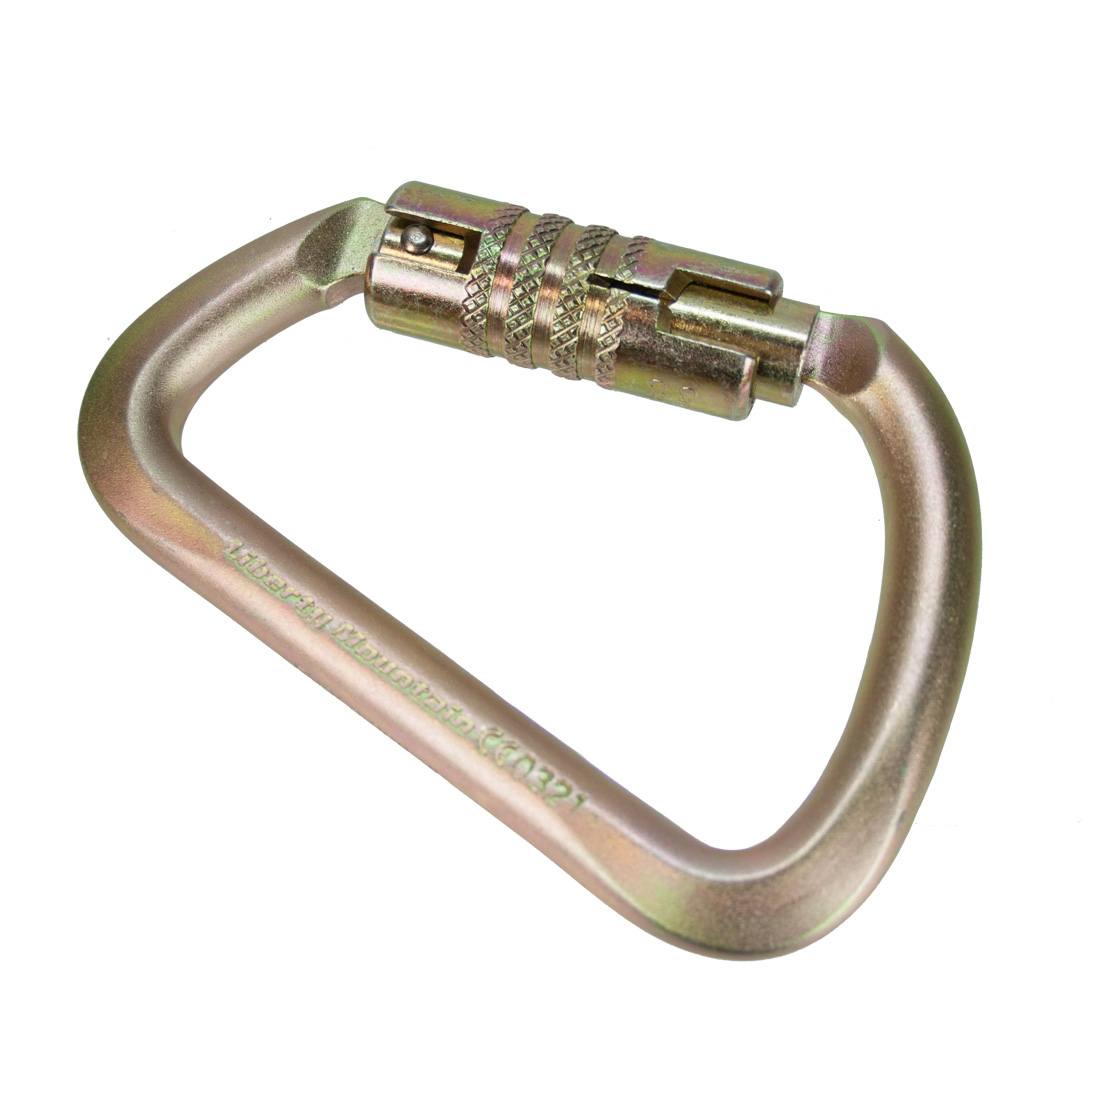 Liberty Mountain ANSI D Carabiner Twist Lock - Large - Oblique Back View